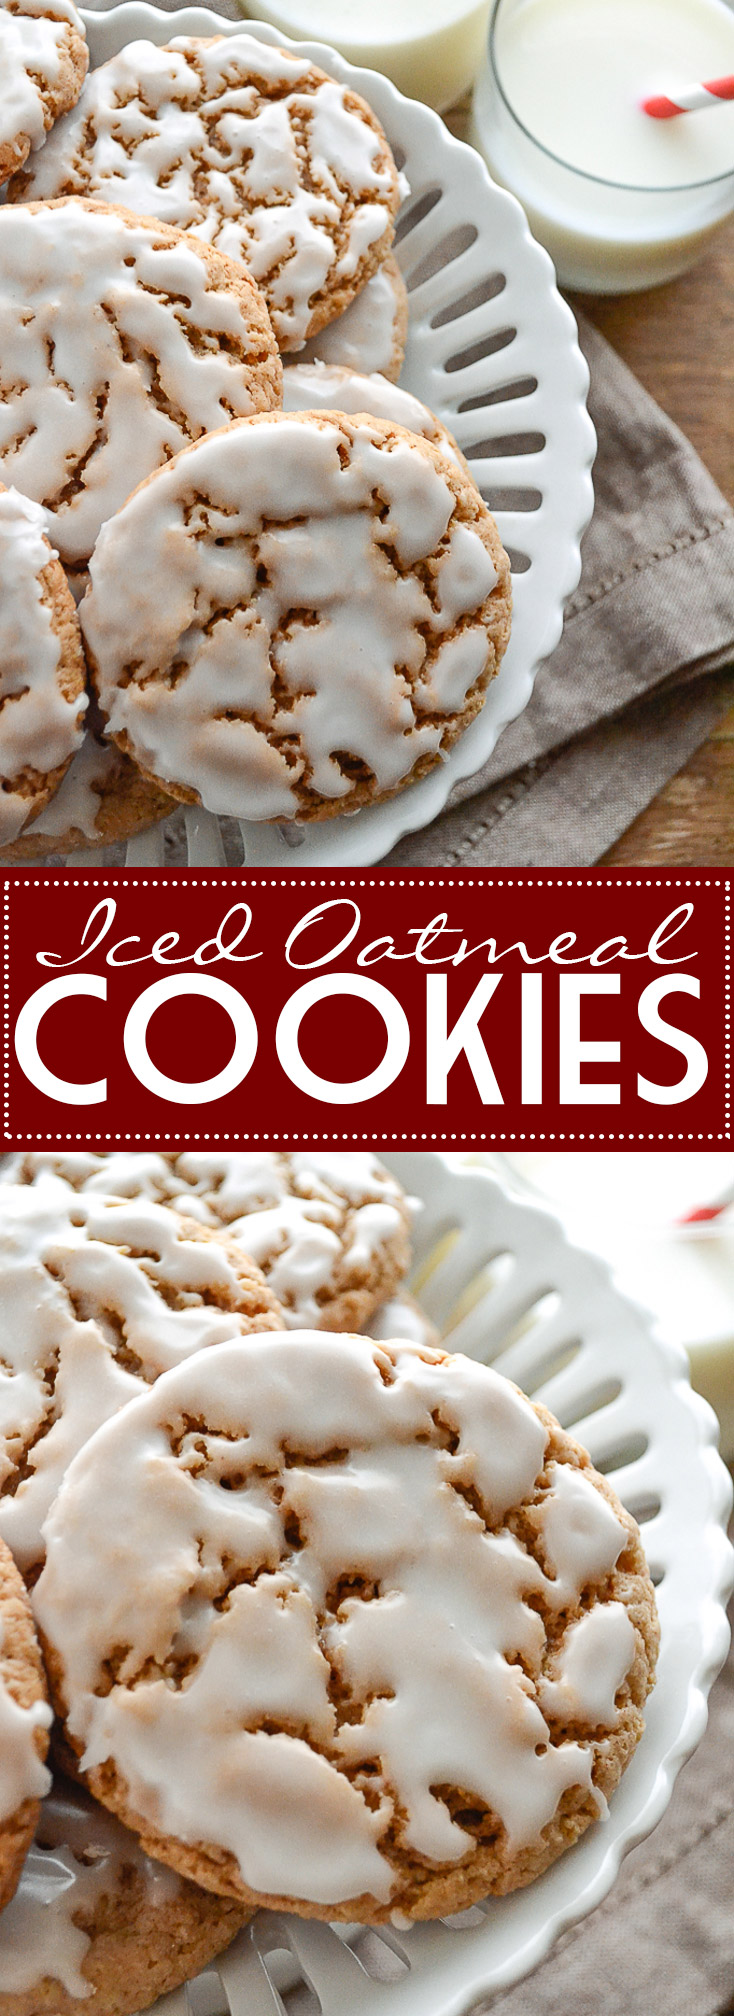 Iced Oatmeal Cookies - perfect with a tall glass of milk! | www.motherthyme.com